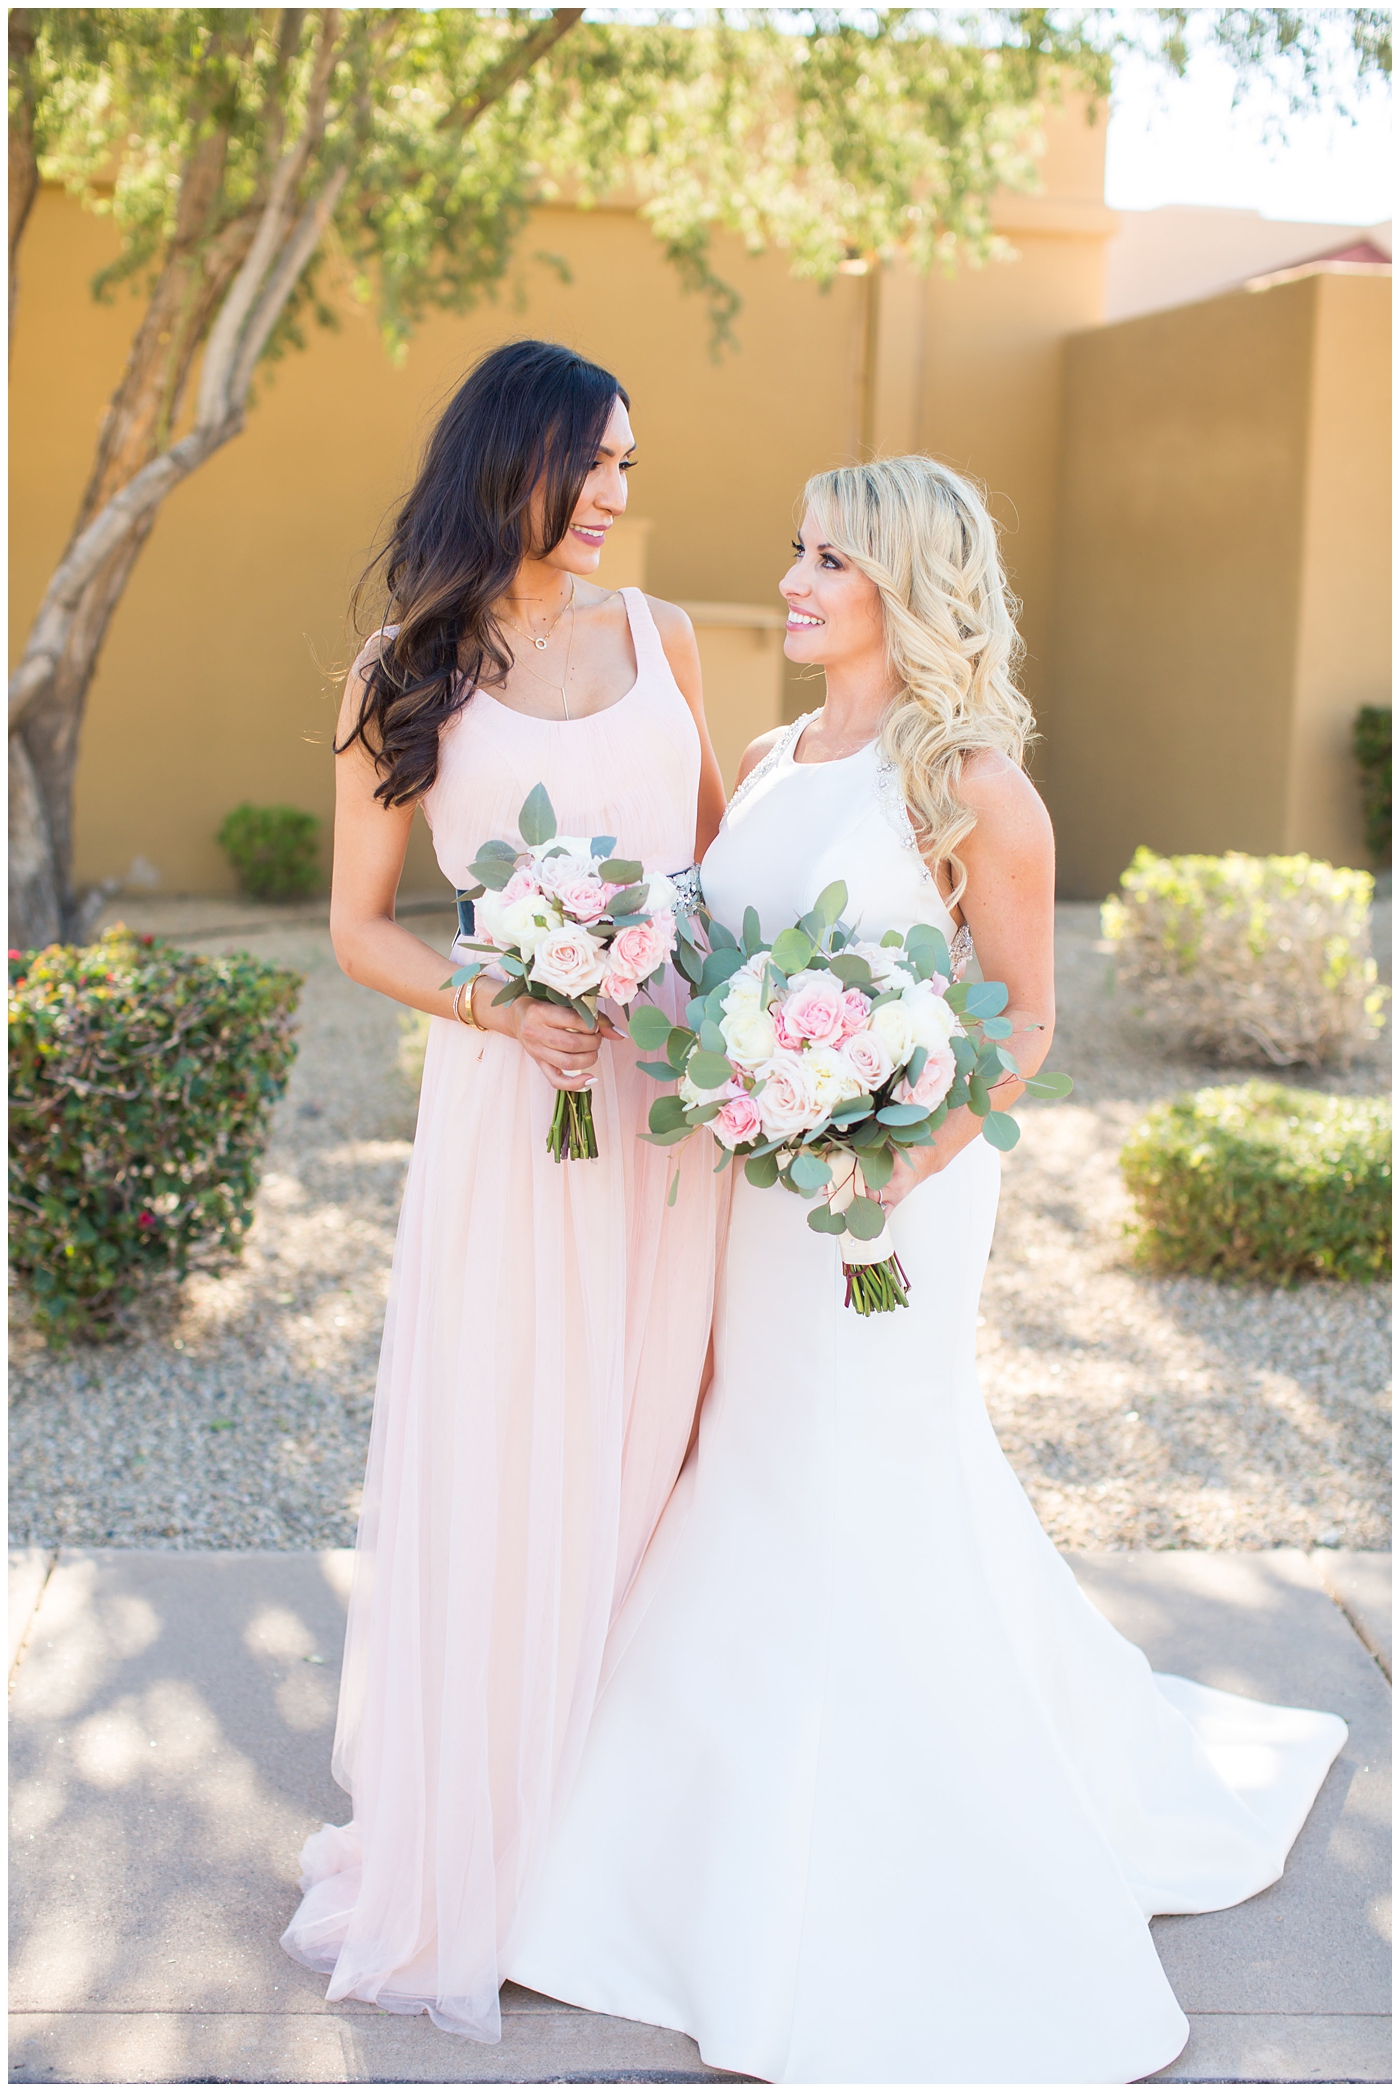 gorgeous bride with side swept hair in racerback pronovias dress and blush pink, white rose and eucalyptus greenery wedding bouquet with bridal party bridesmaids in blush pink dresses on wedding day